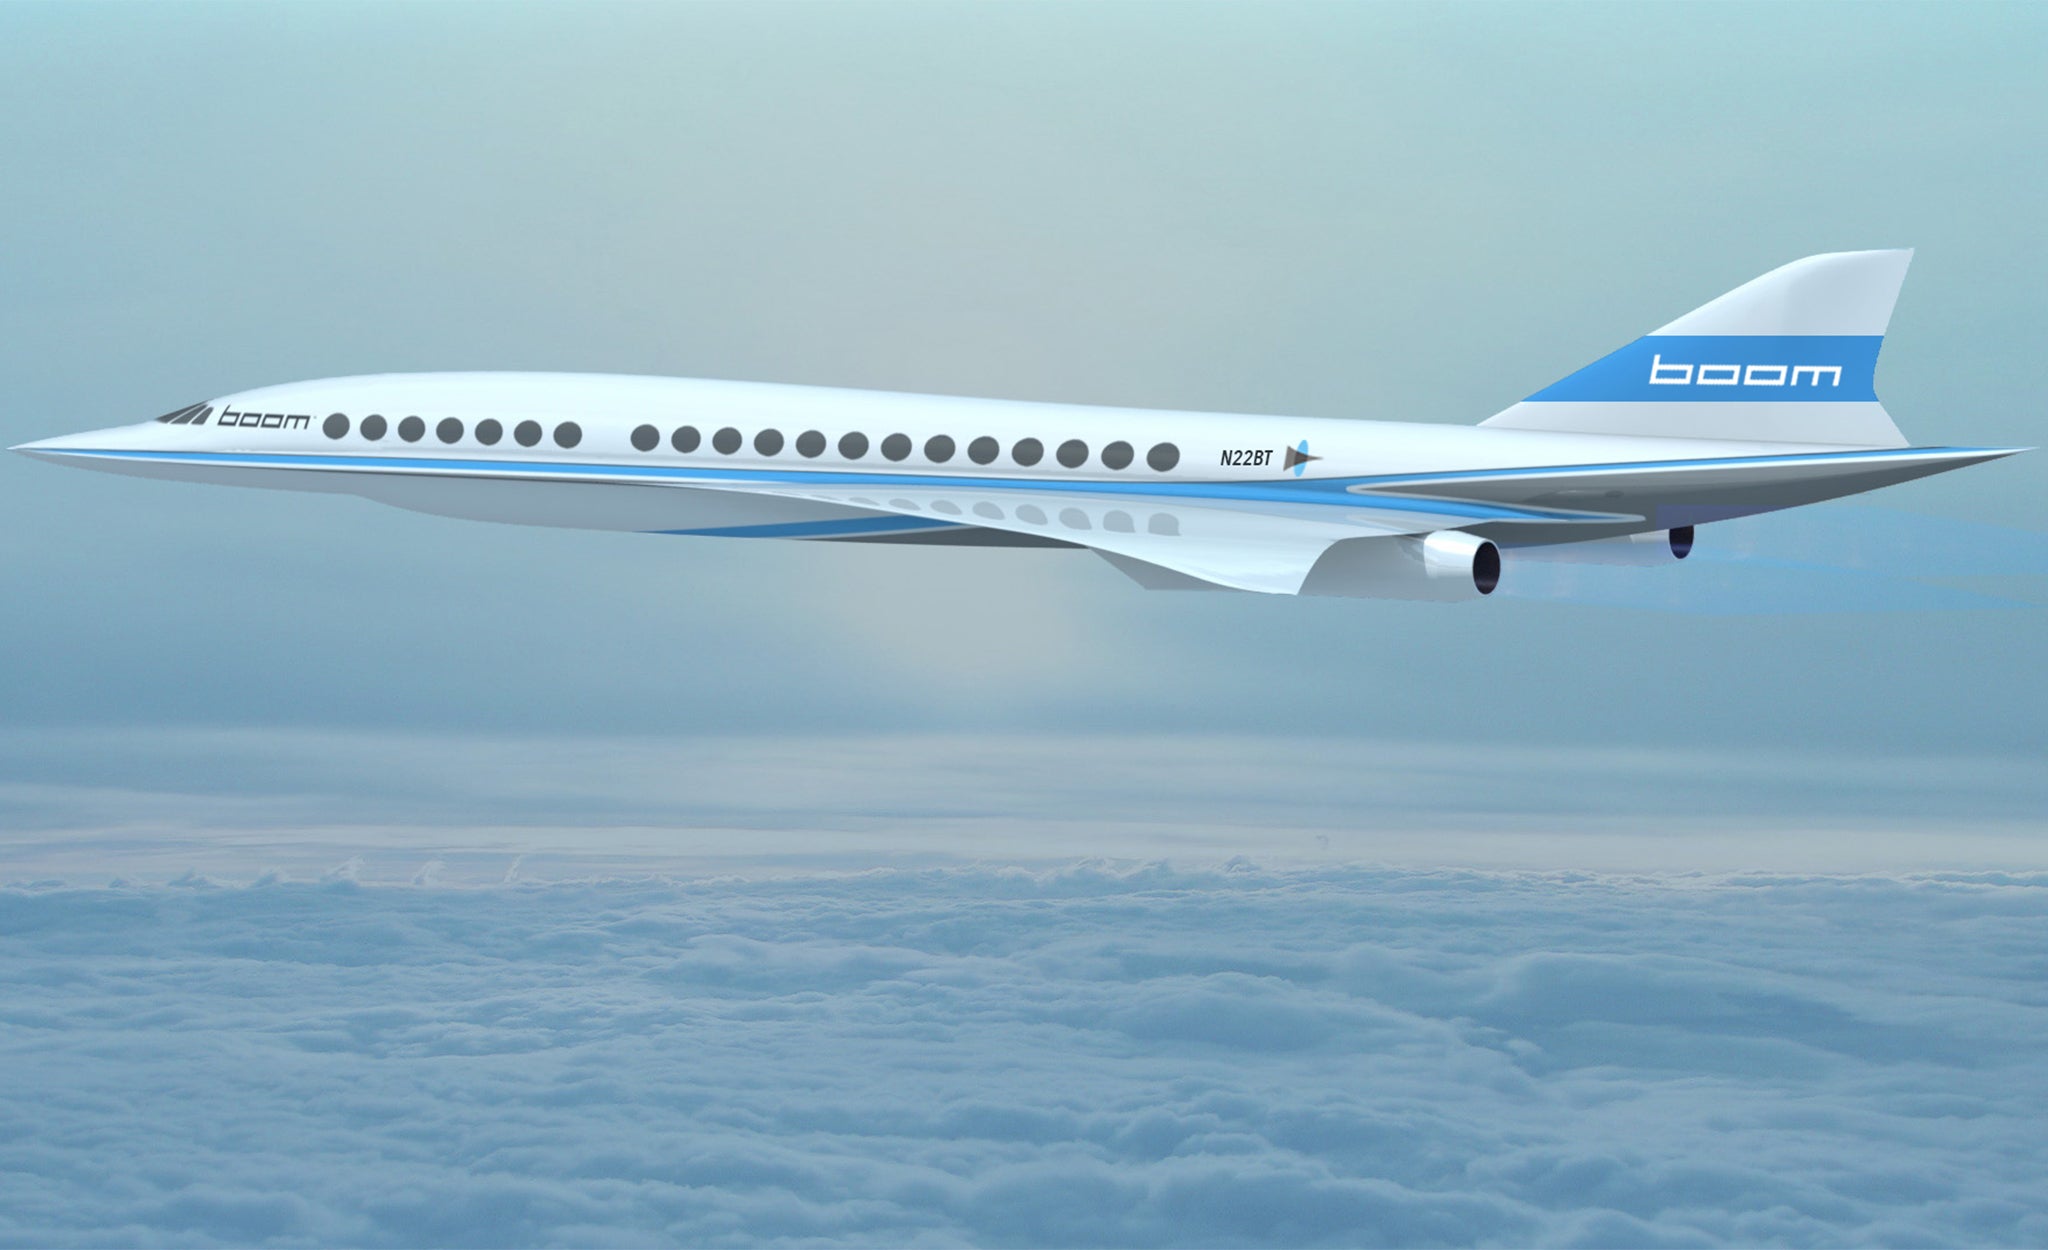 Boom's designs mean the plane would fly more than 2.6 times faster than other airlines today